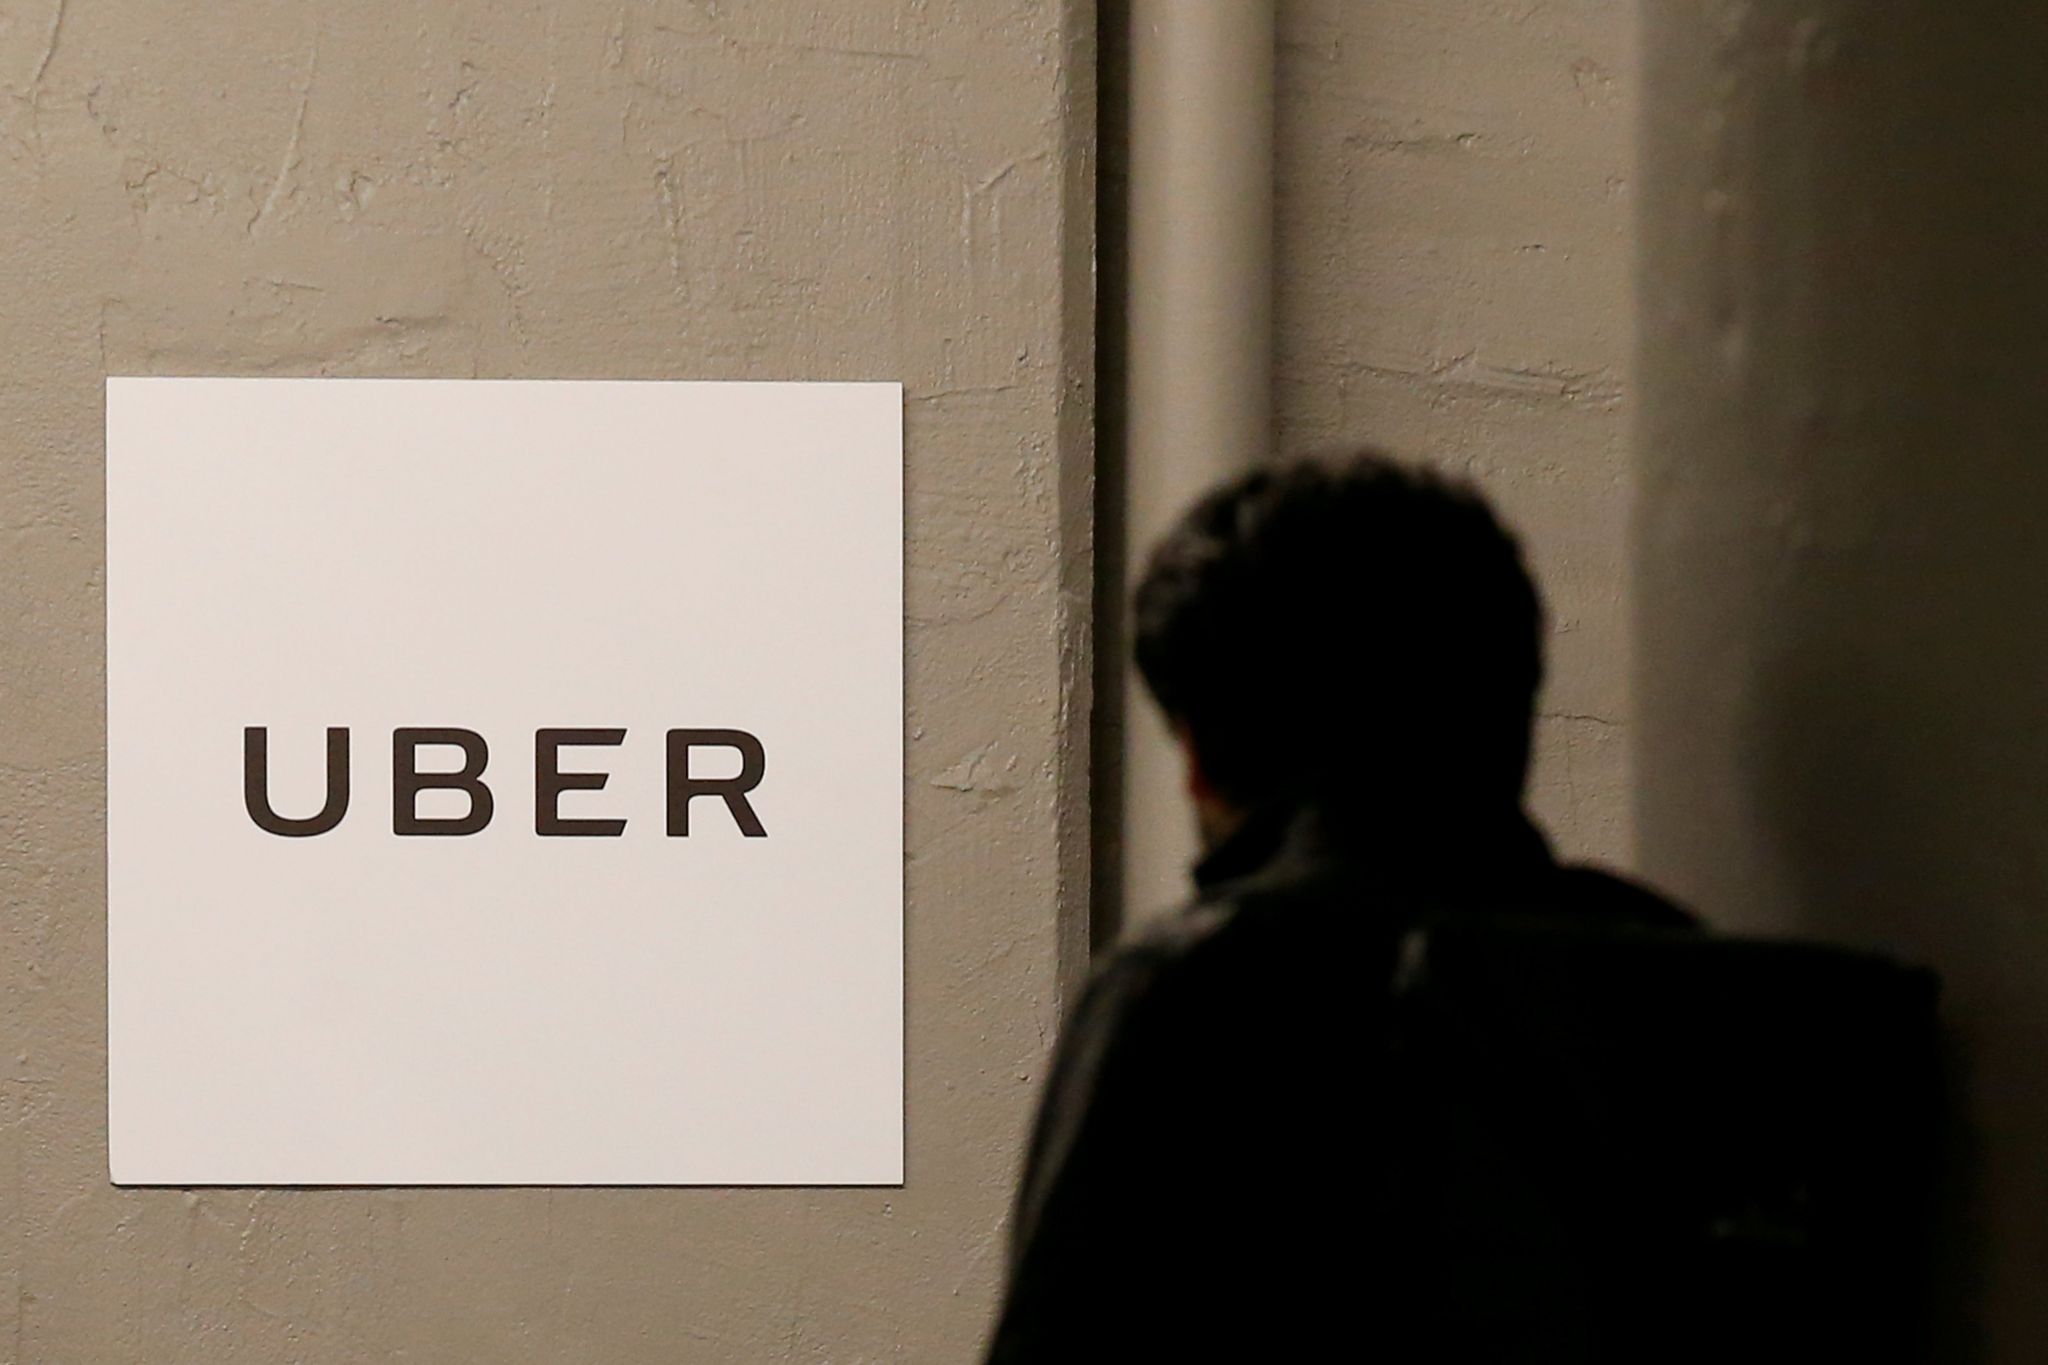 A man arrives at the Uber offices in Queens, New York, US, 2 February 2017